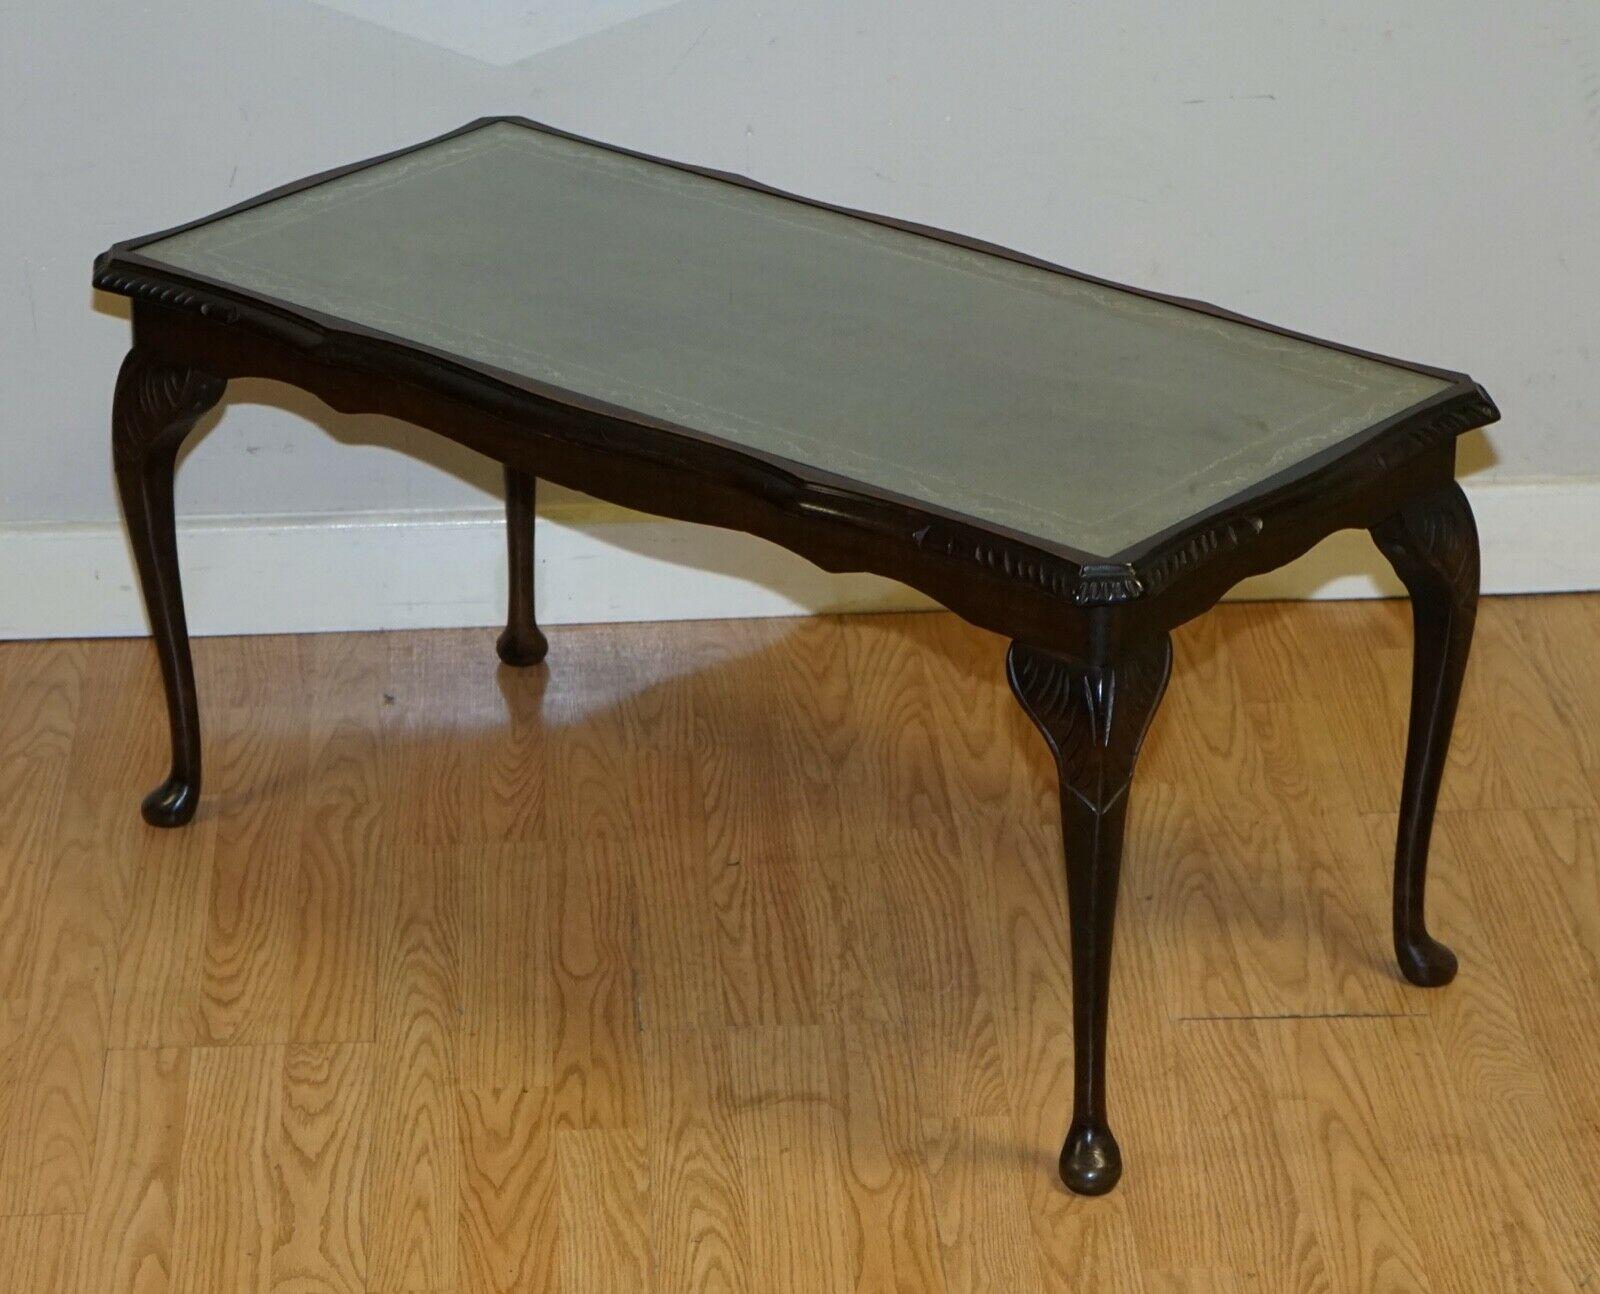 Vintage Coffee Table with Embossed Green Leather Top on Elegant Queen Anne Legs 1